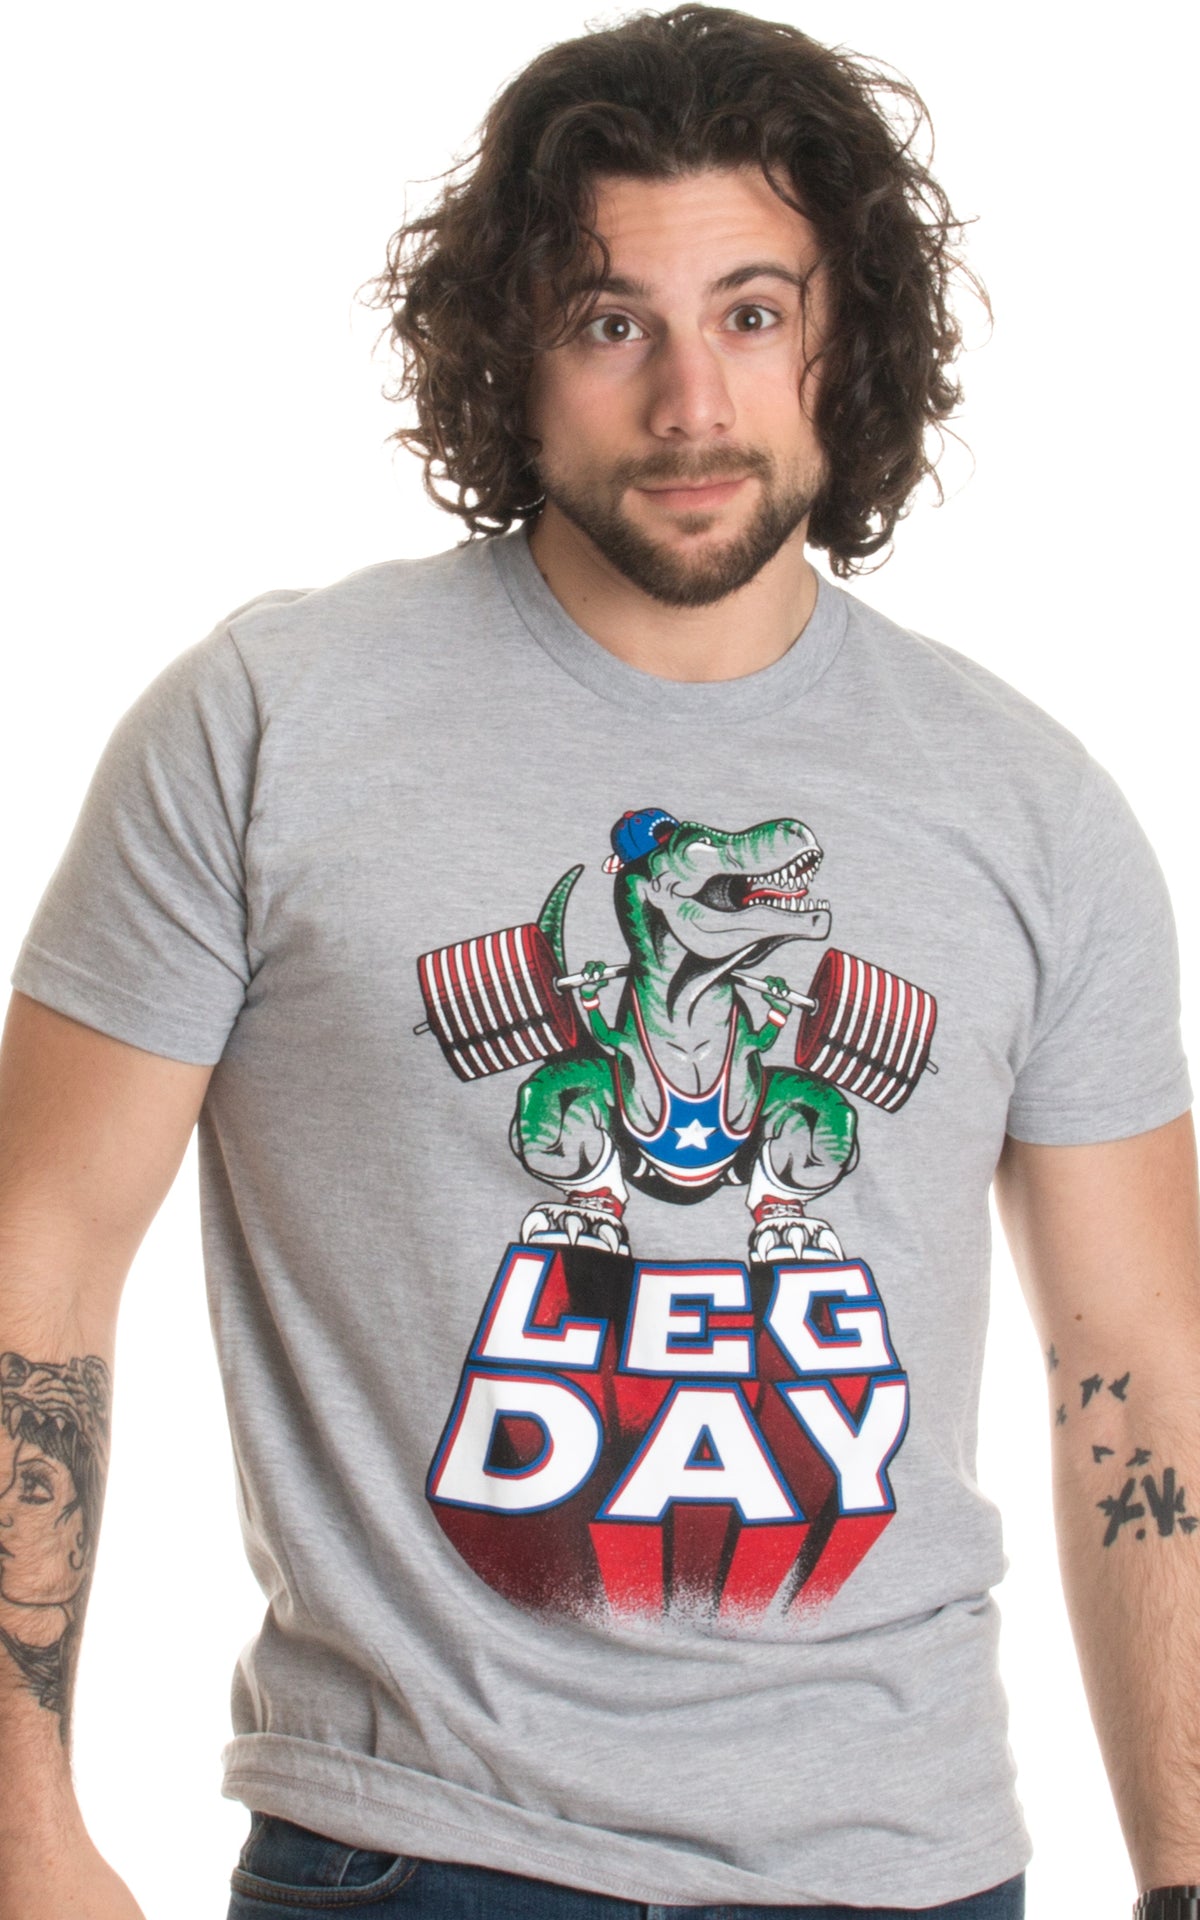 LEG DAY | Funny Weight Lifting Olympic Barbell Training Squat Workout T-shirt